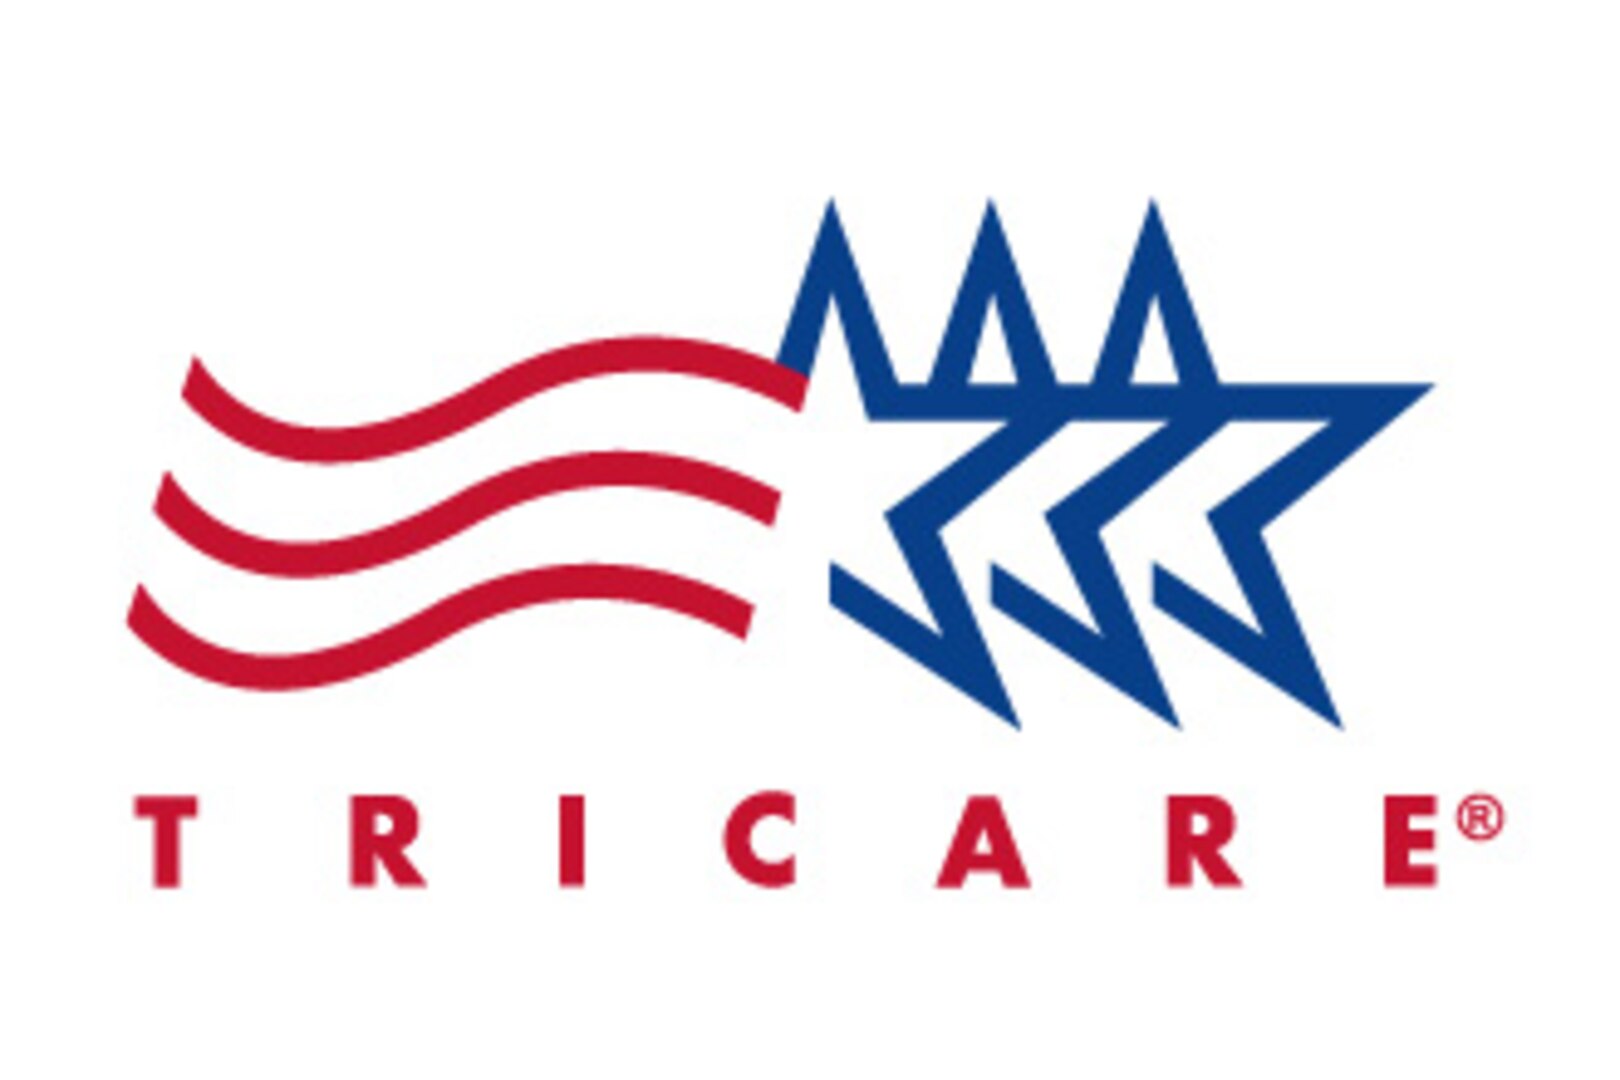 Getting speech therapy through TRICARE > Joint Base San Antonio > News